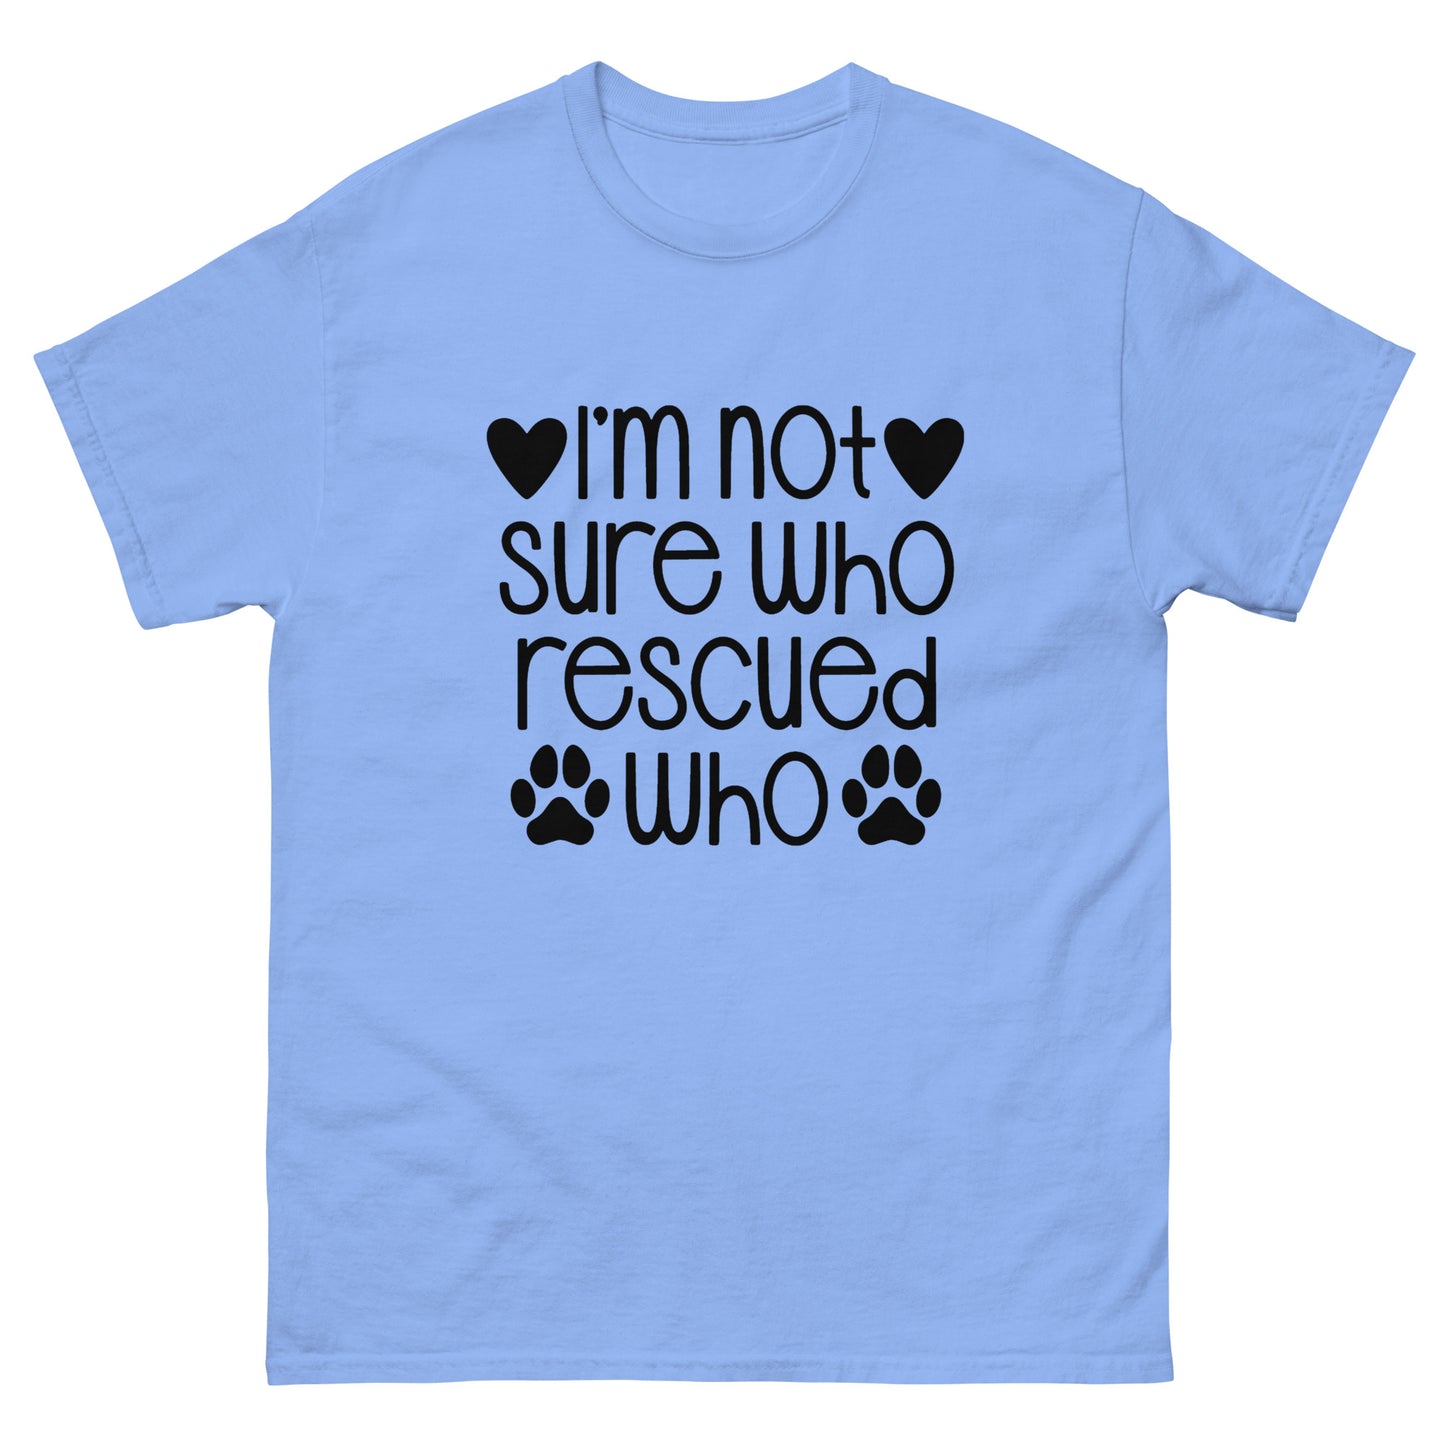 Not Sure Who Rescued Who - classic tee